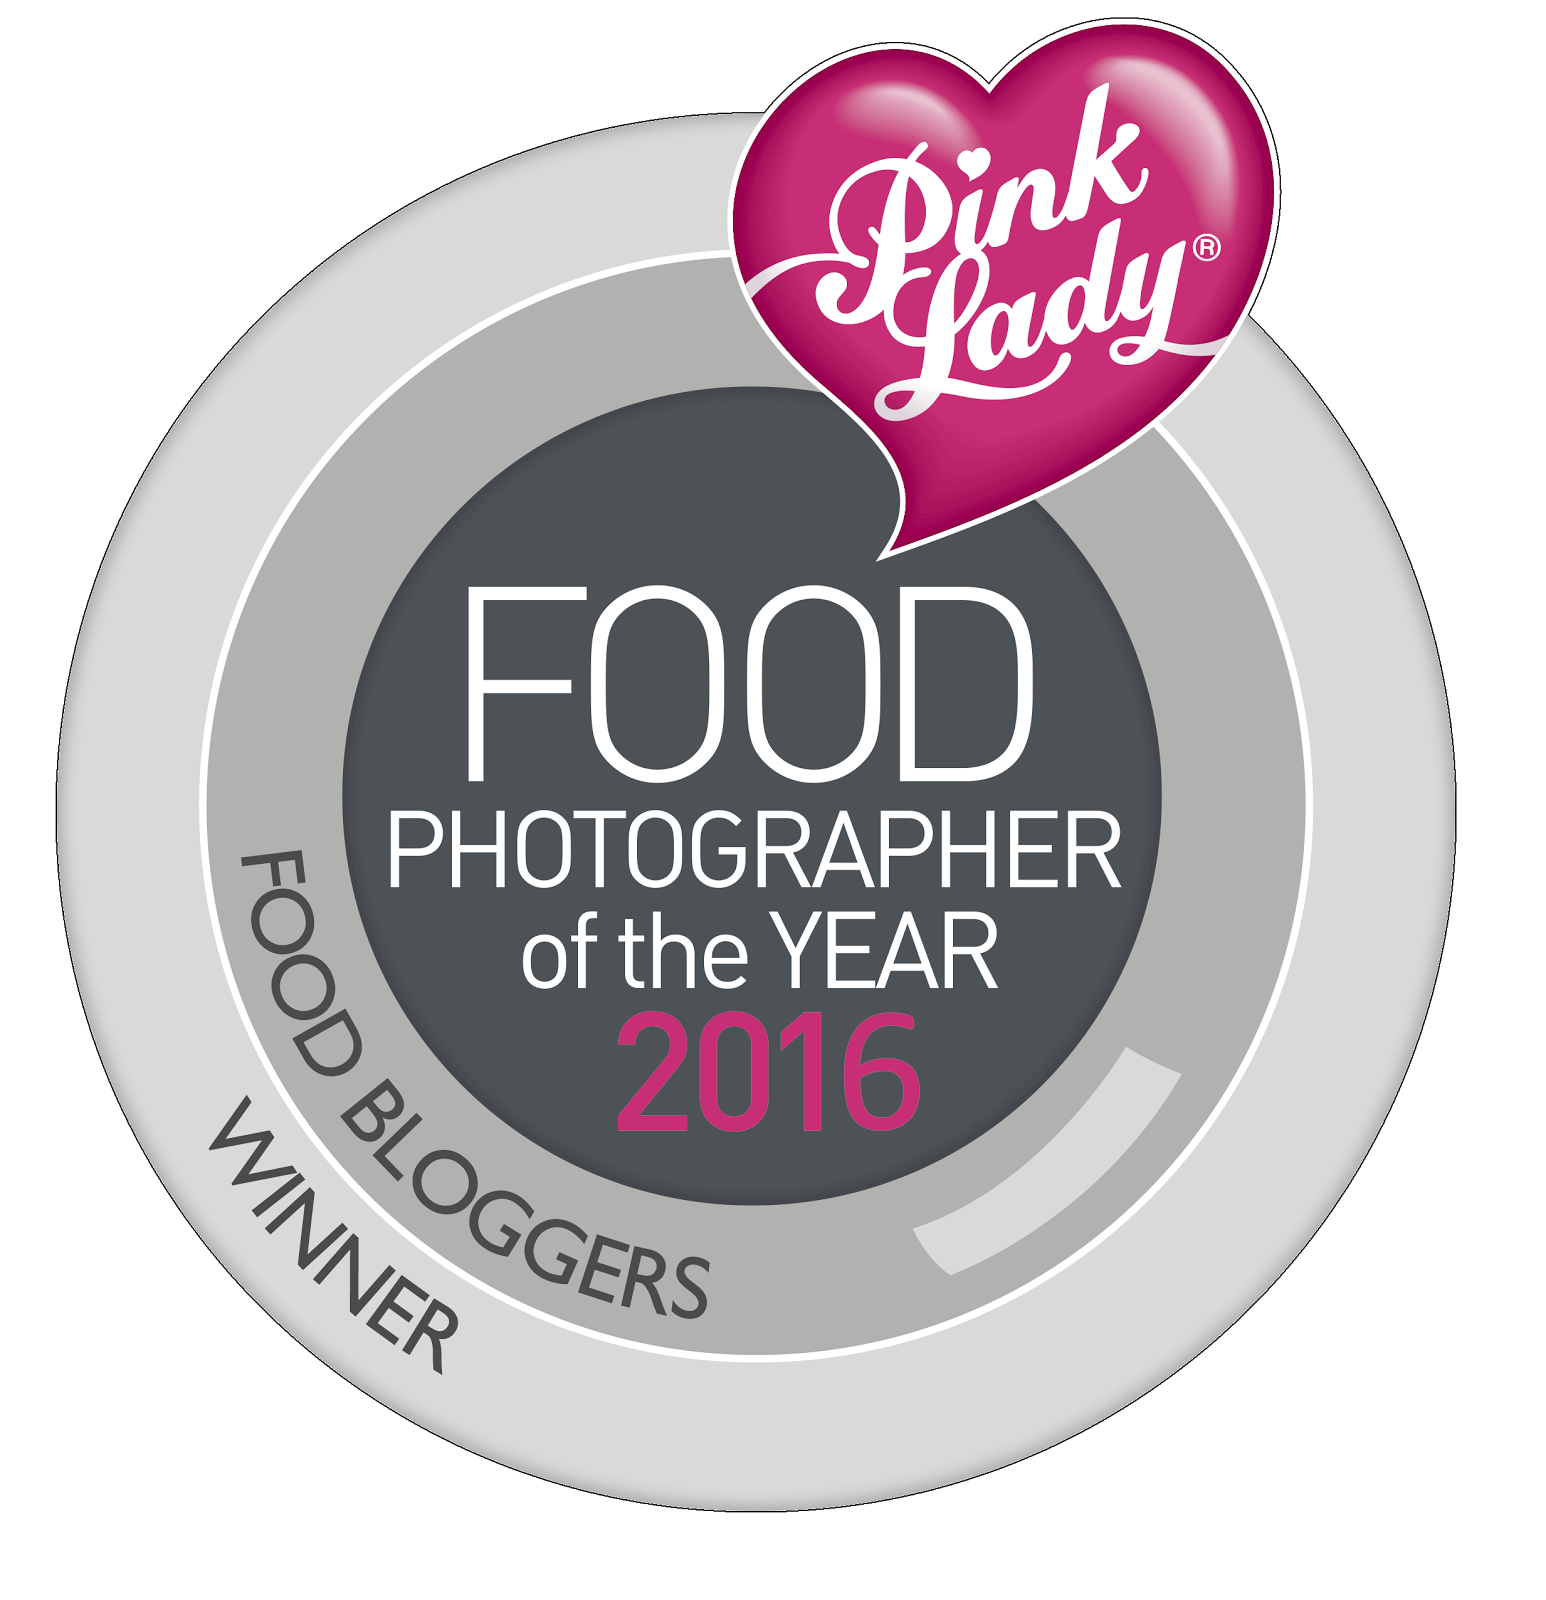 Food Photographer of the Year 2016